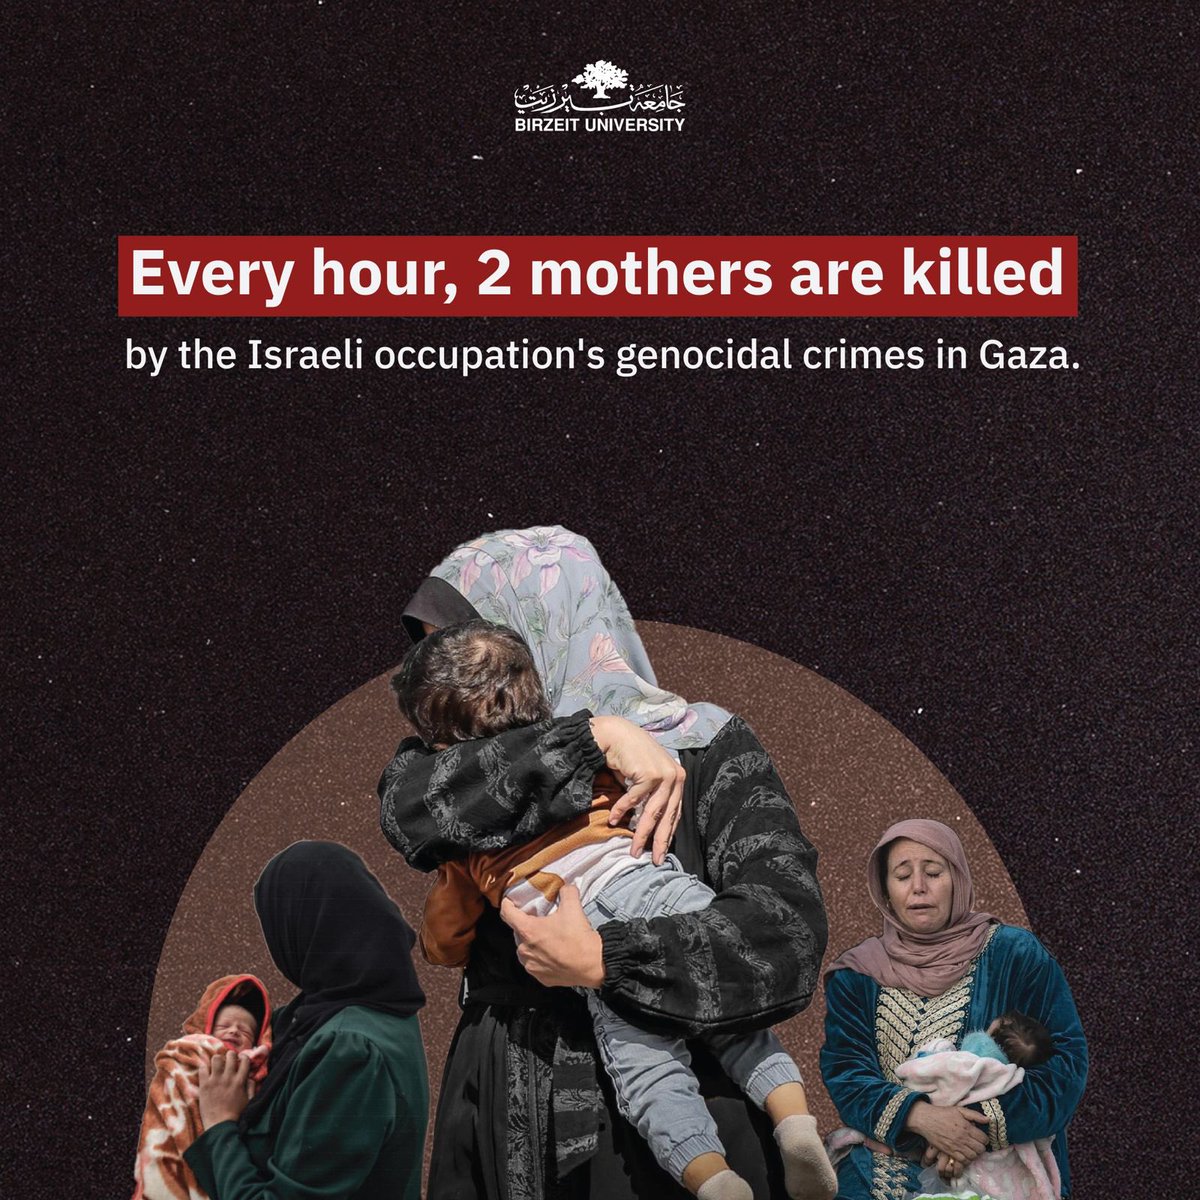 While the world celebrates Mother's Day, we remember the resilient Palestinian mothers, especially those in Gaza that have endured the genocide for 167 continuous days, while the whole world watches. A salute to every Palestinian mother, may you live in freedom and peace.